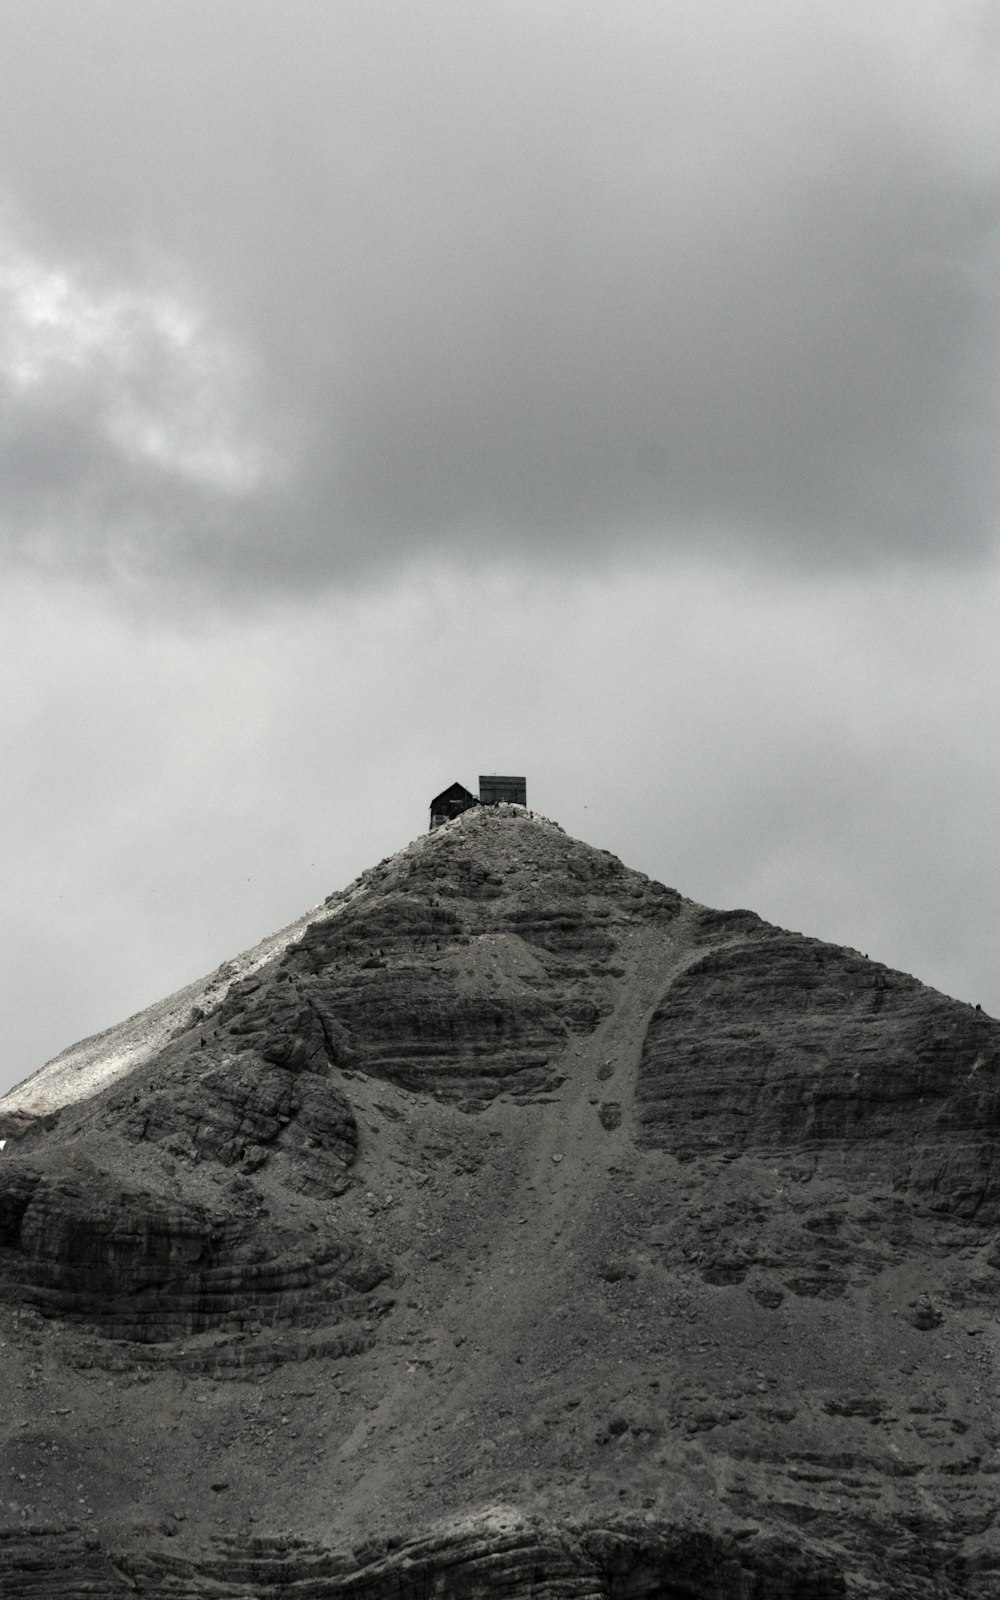 a couple of sheep standing on top of a mountain